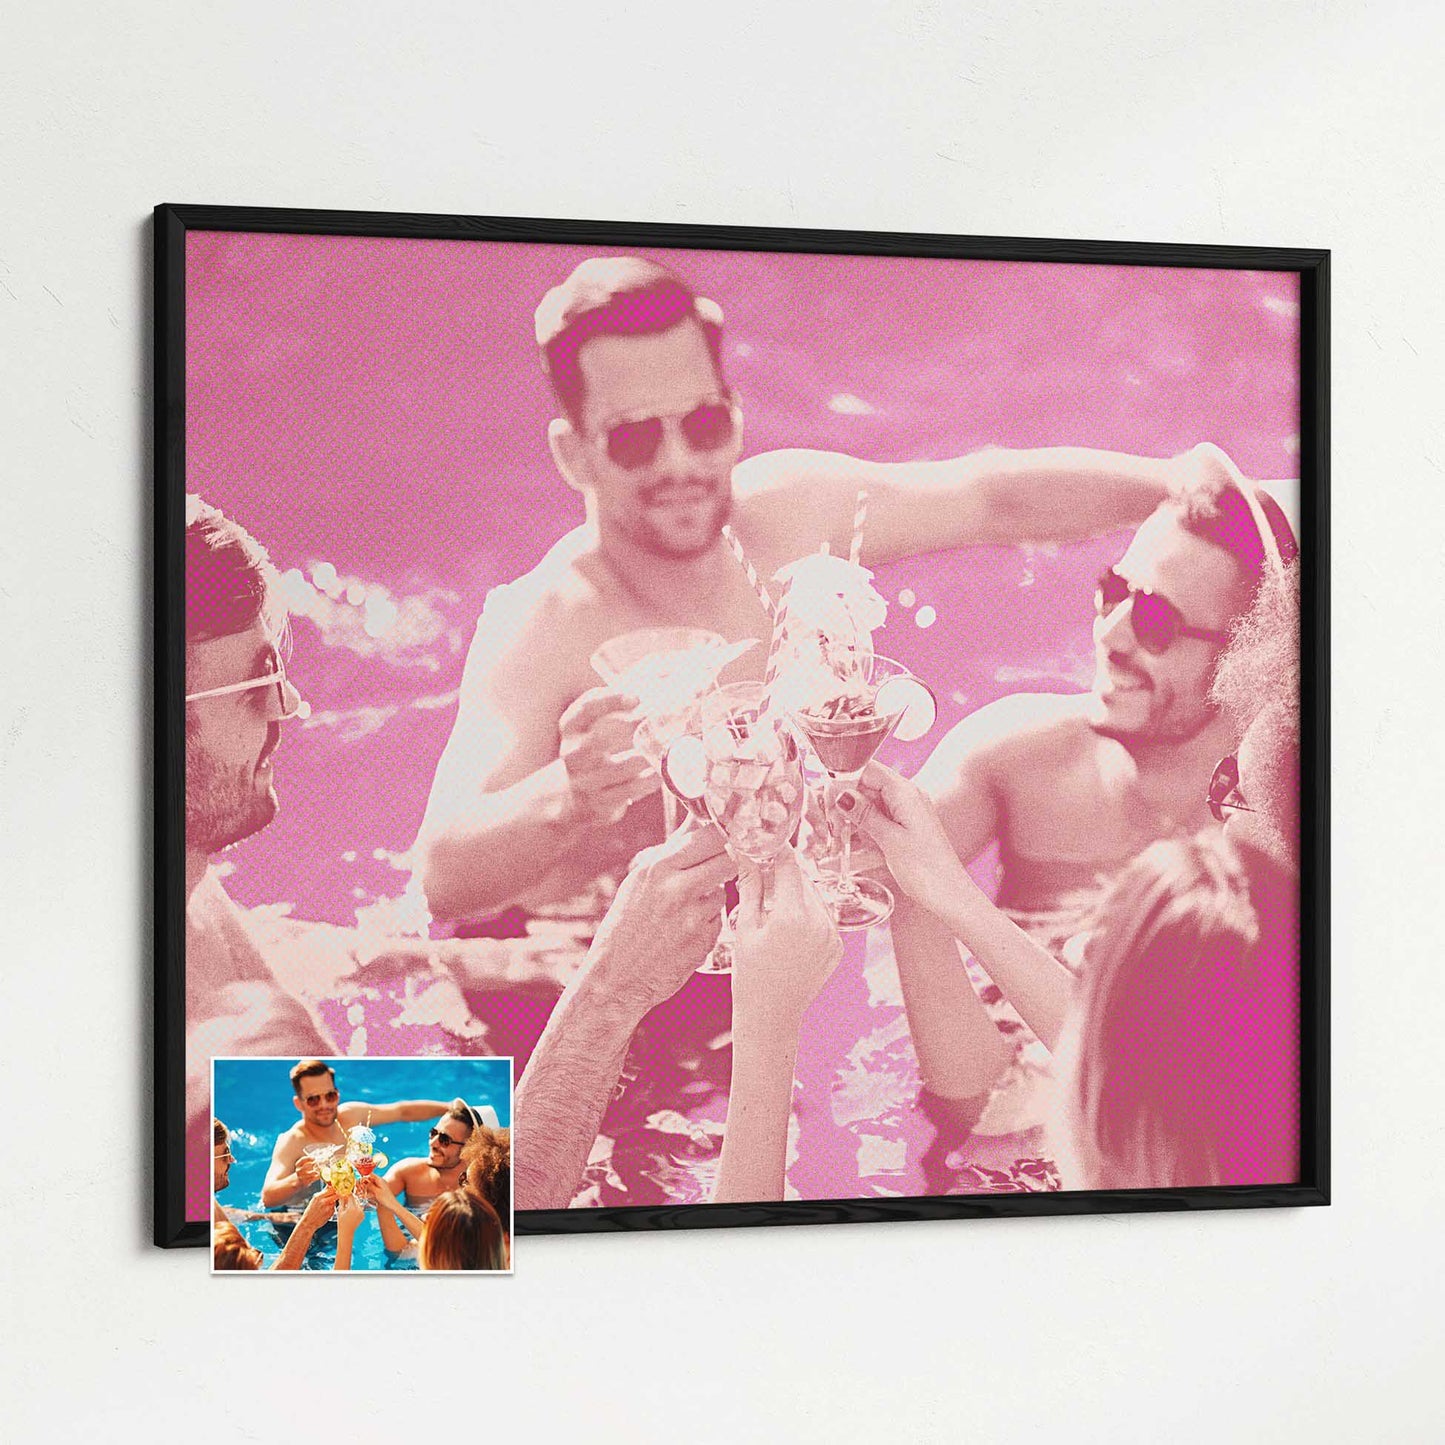 Experience the lively energy of the Personalised Pink Pop Art Framed Print, inspired by the iconic pop art style. The halftone effect and vivid colors create a cool and vibrant aesthetic that instantly elevates any space, print from photo